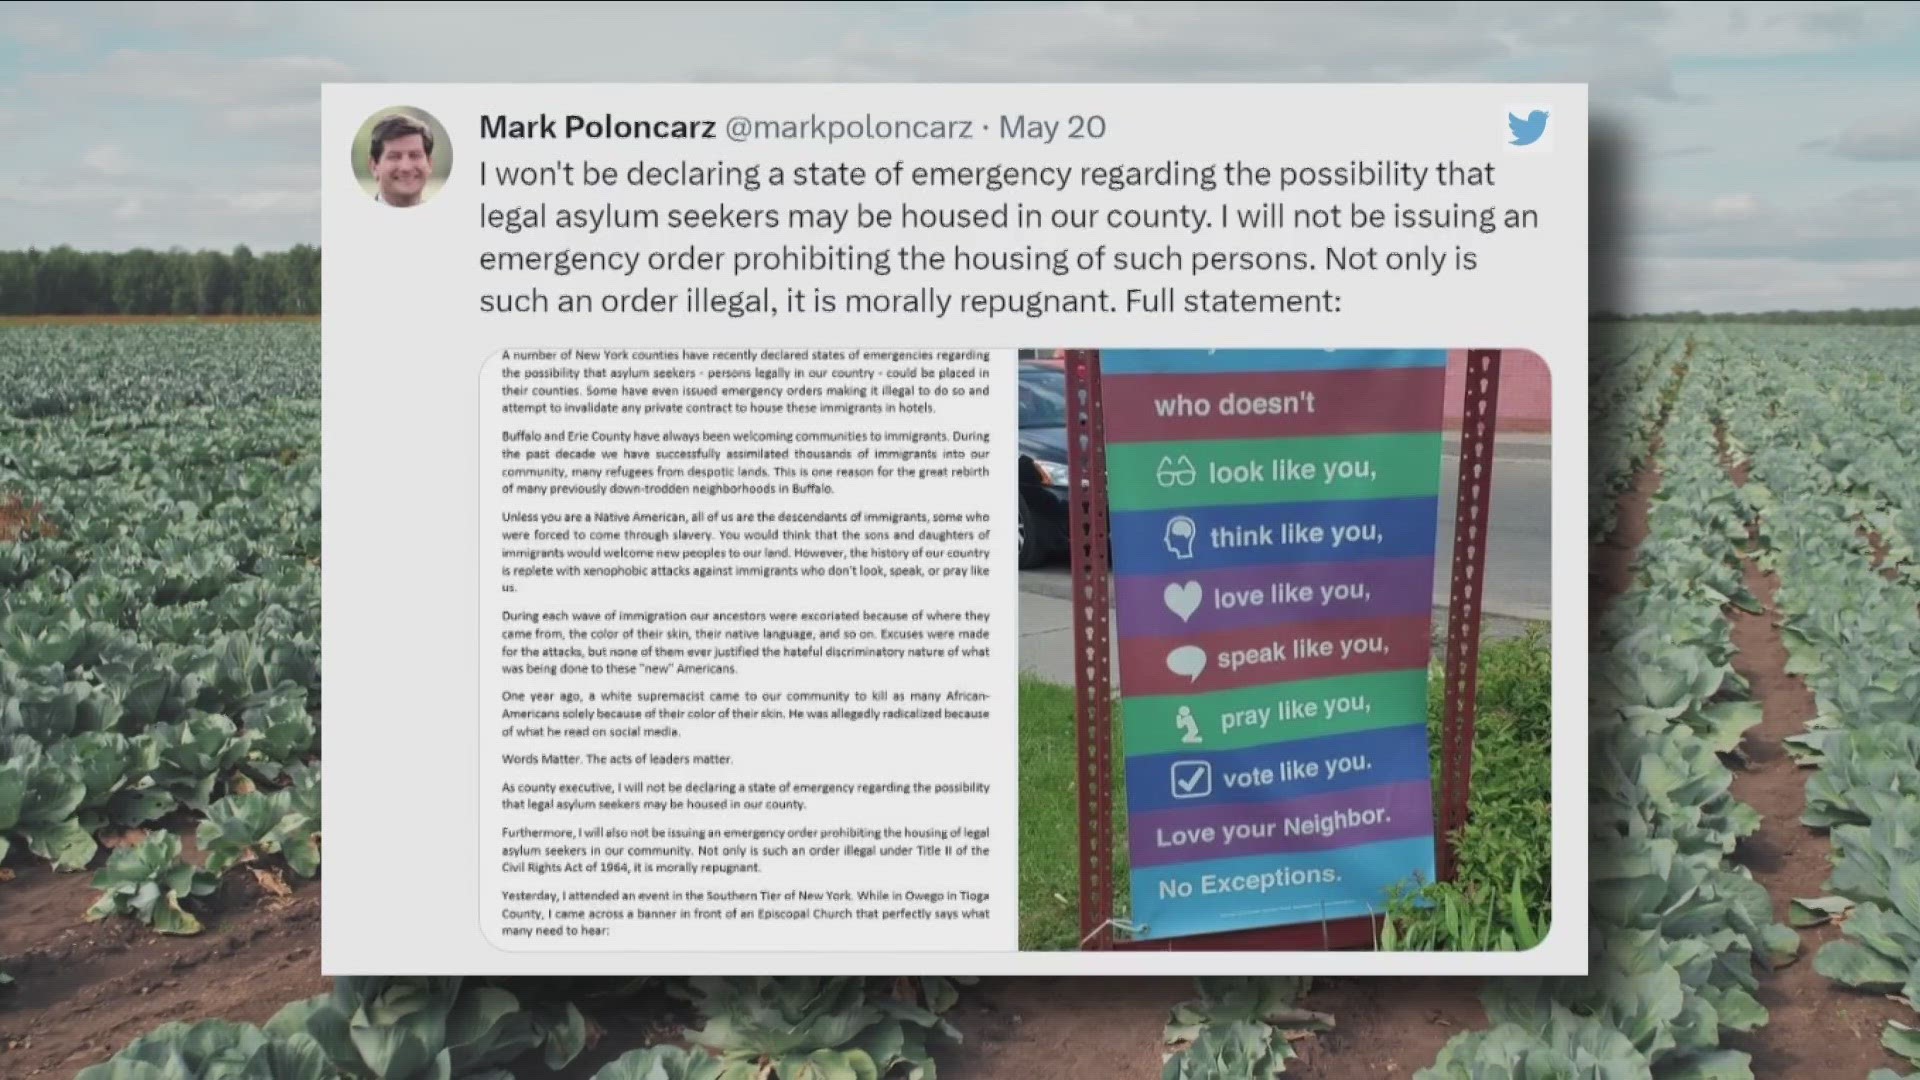 Over the weekend, Erie County Executive Mark Poloncarz shared a statement on social media about surrounding counties issuing states of emergency calling them illegal